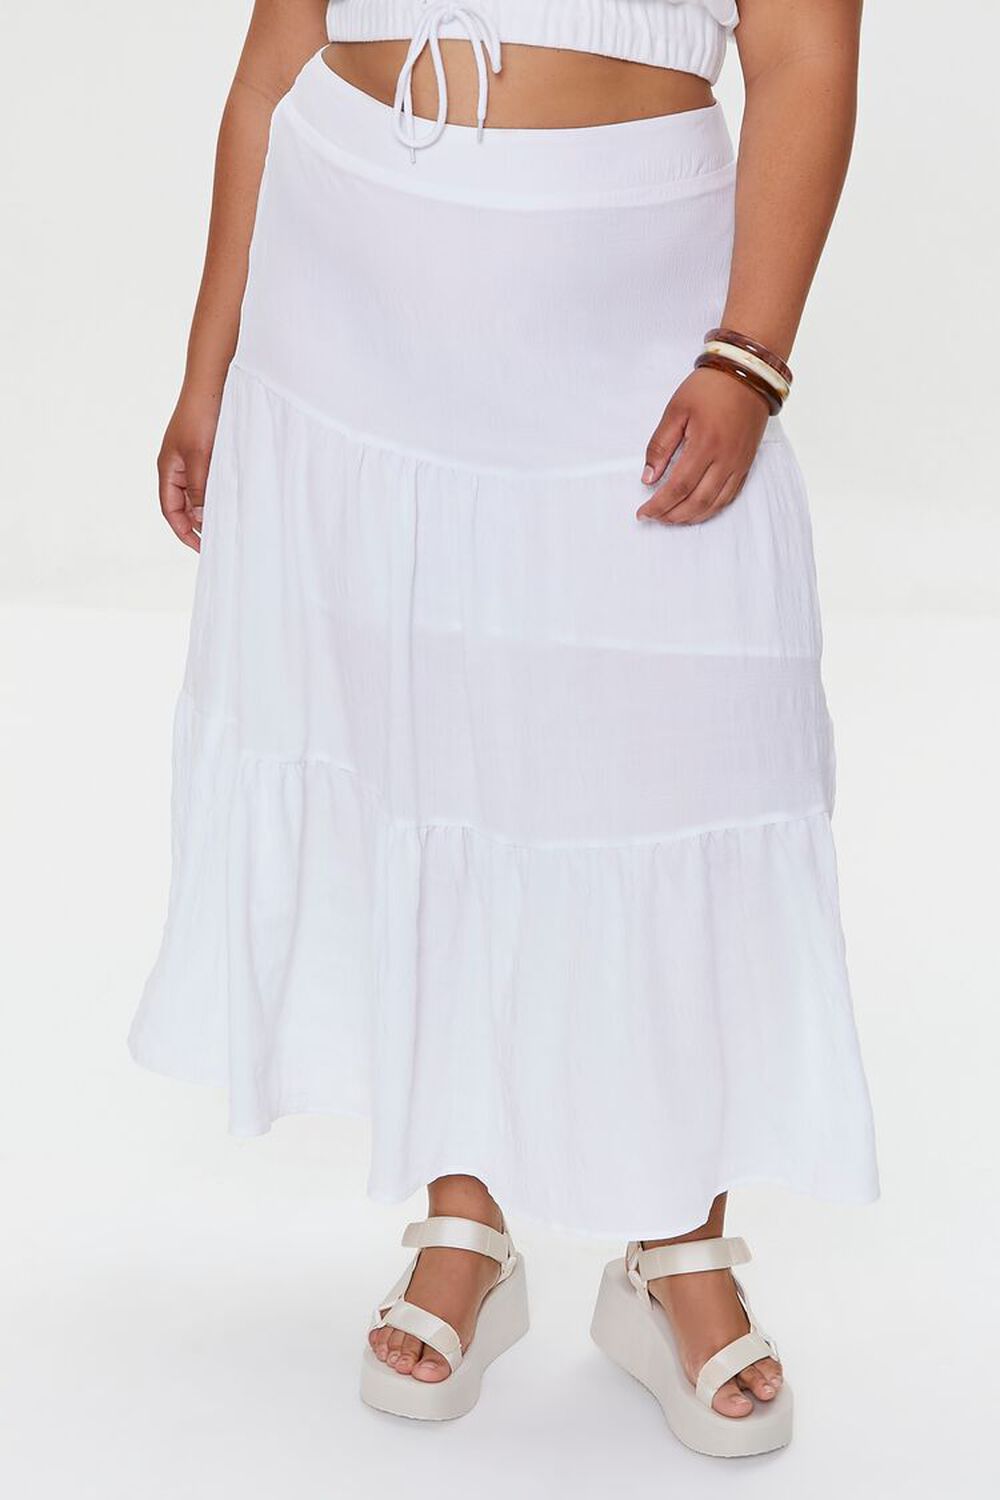 Plus Size Tiered Maxi Skirt, image 2